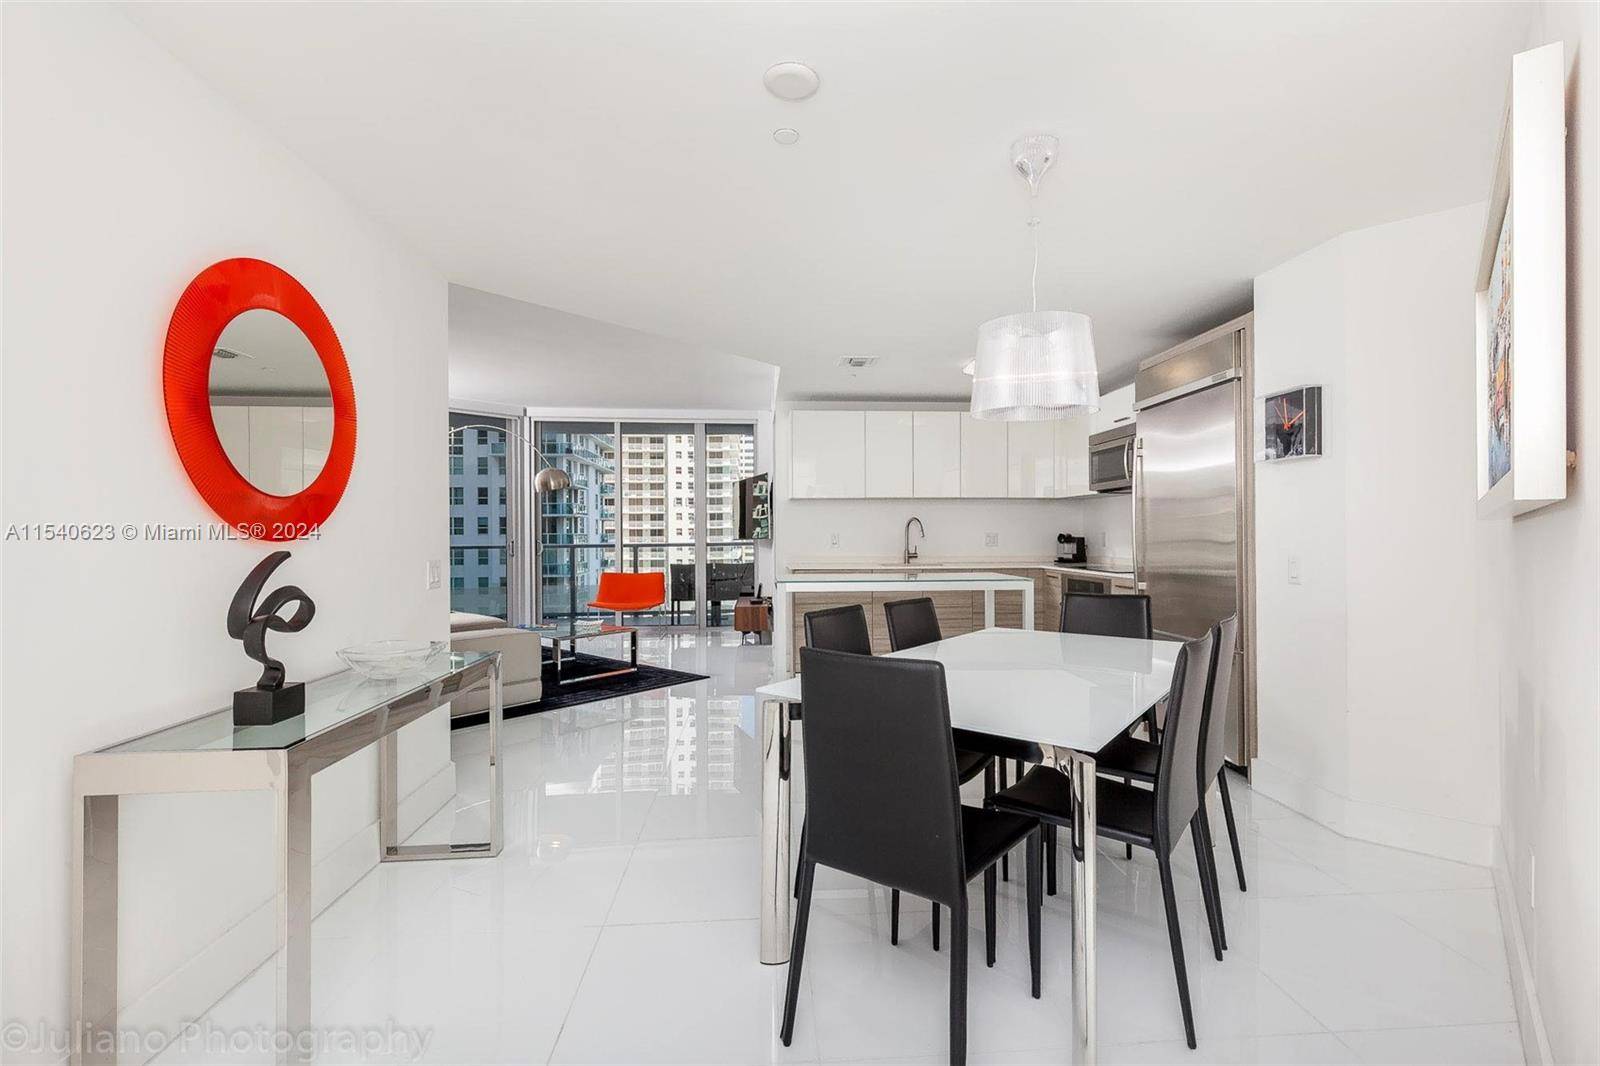 TURNKEY Professionally decorated and furnished 2BD 2BTH located in Miami's desirable neighborhood.